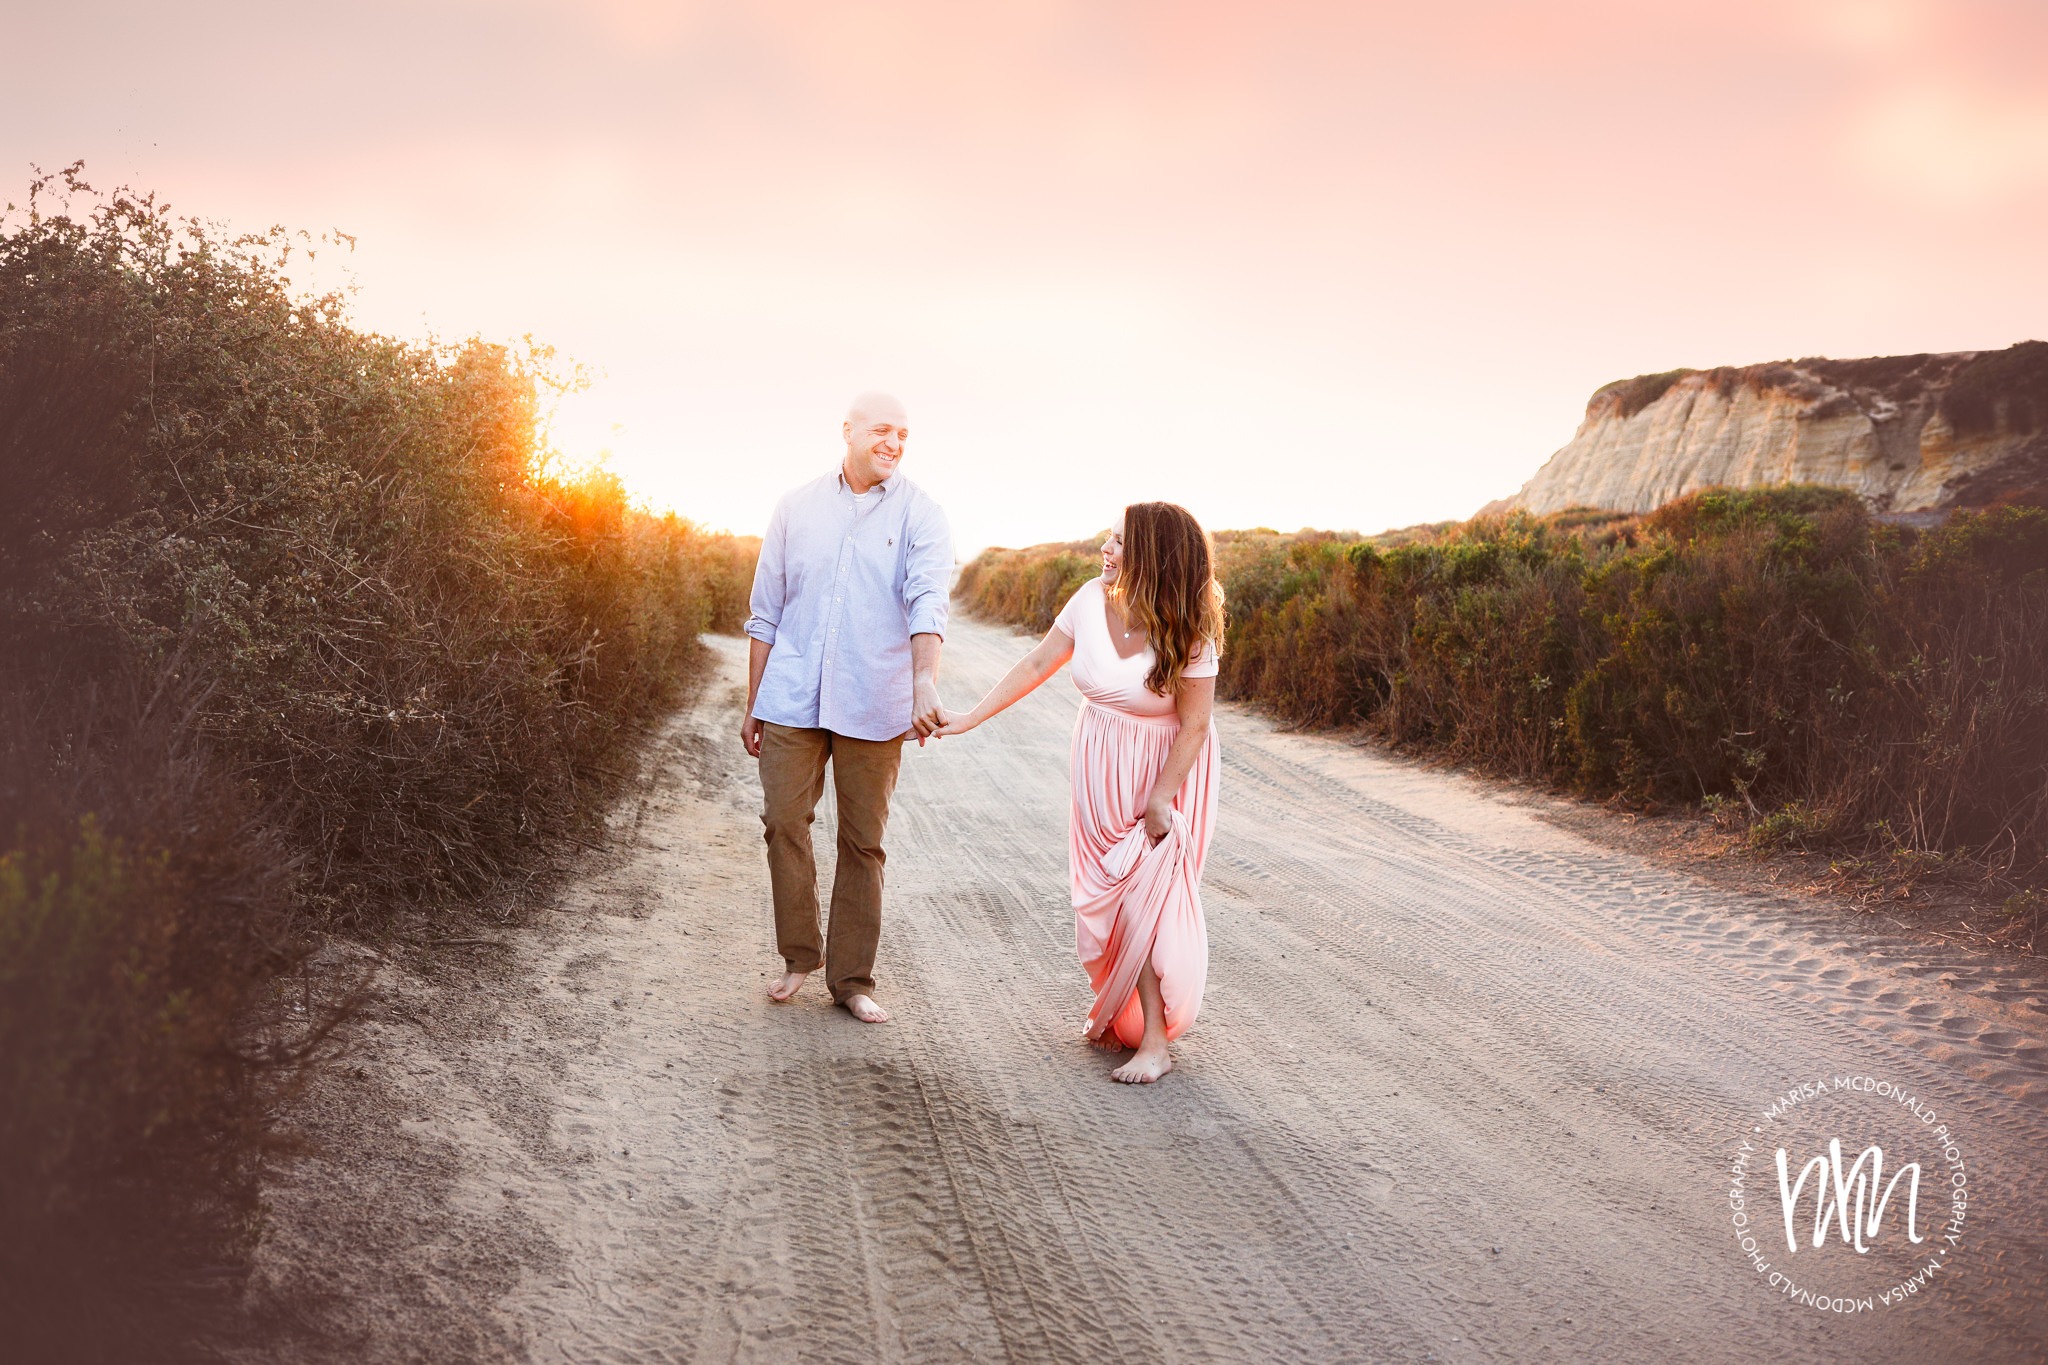 San Diego maternity photographer, natural maternity photography, Southern California maternity photographer, best Southern California maternity photographer, best San Diego maternity photography, beach maternity session